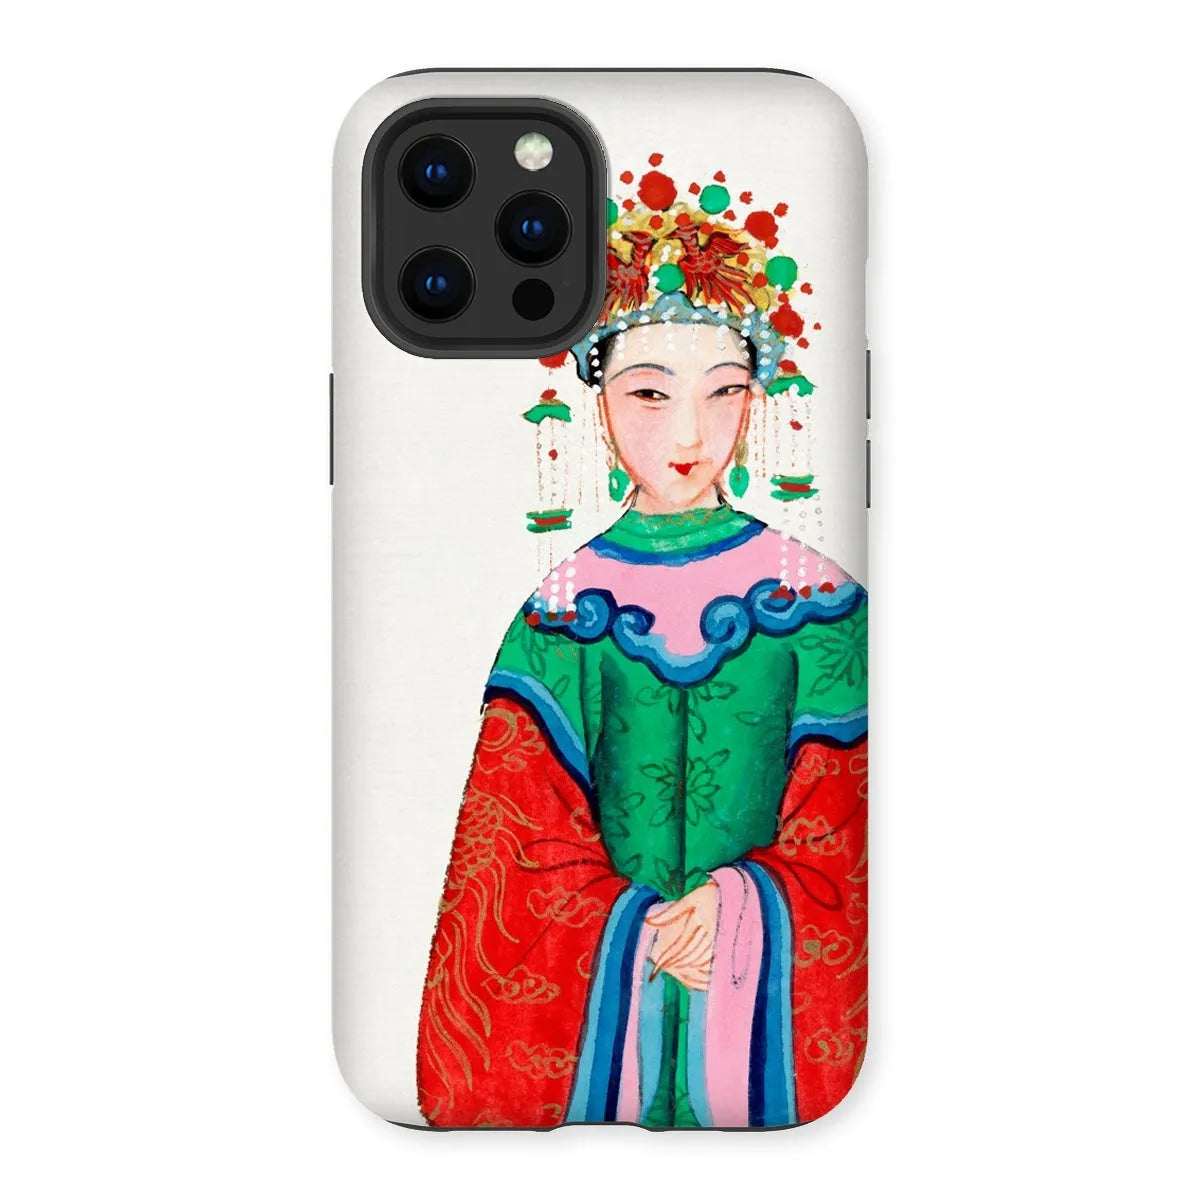 Imperial Princess - Chinese Aesthetic Painting Phone Case - Iphone 12 Pro Max / Matte - Mobile Phone Cases - Aesthetic